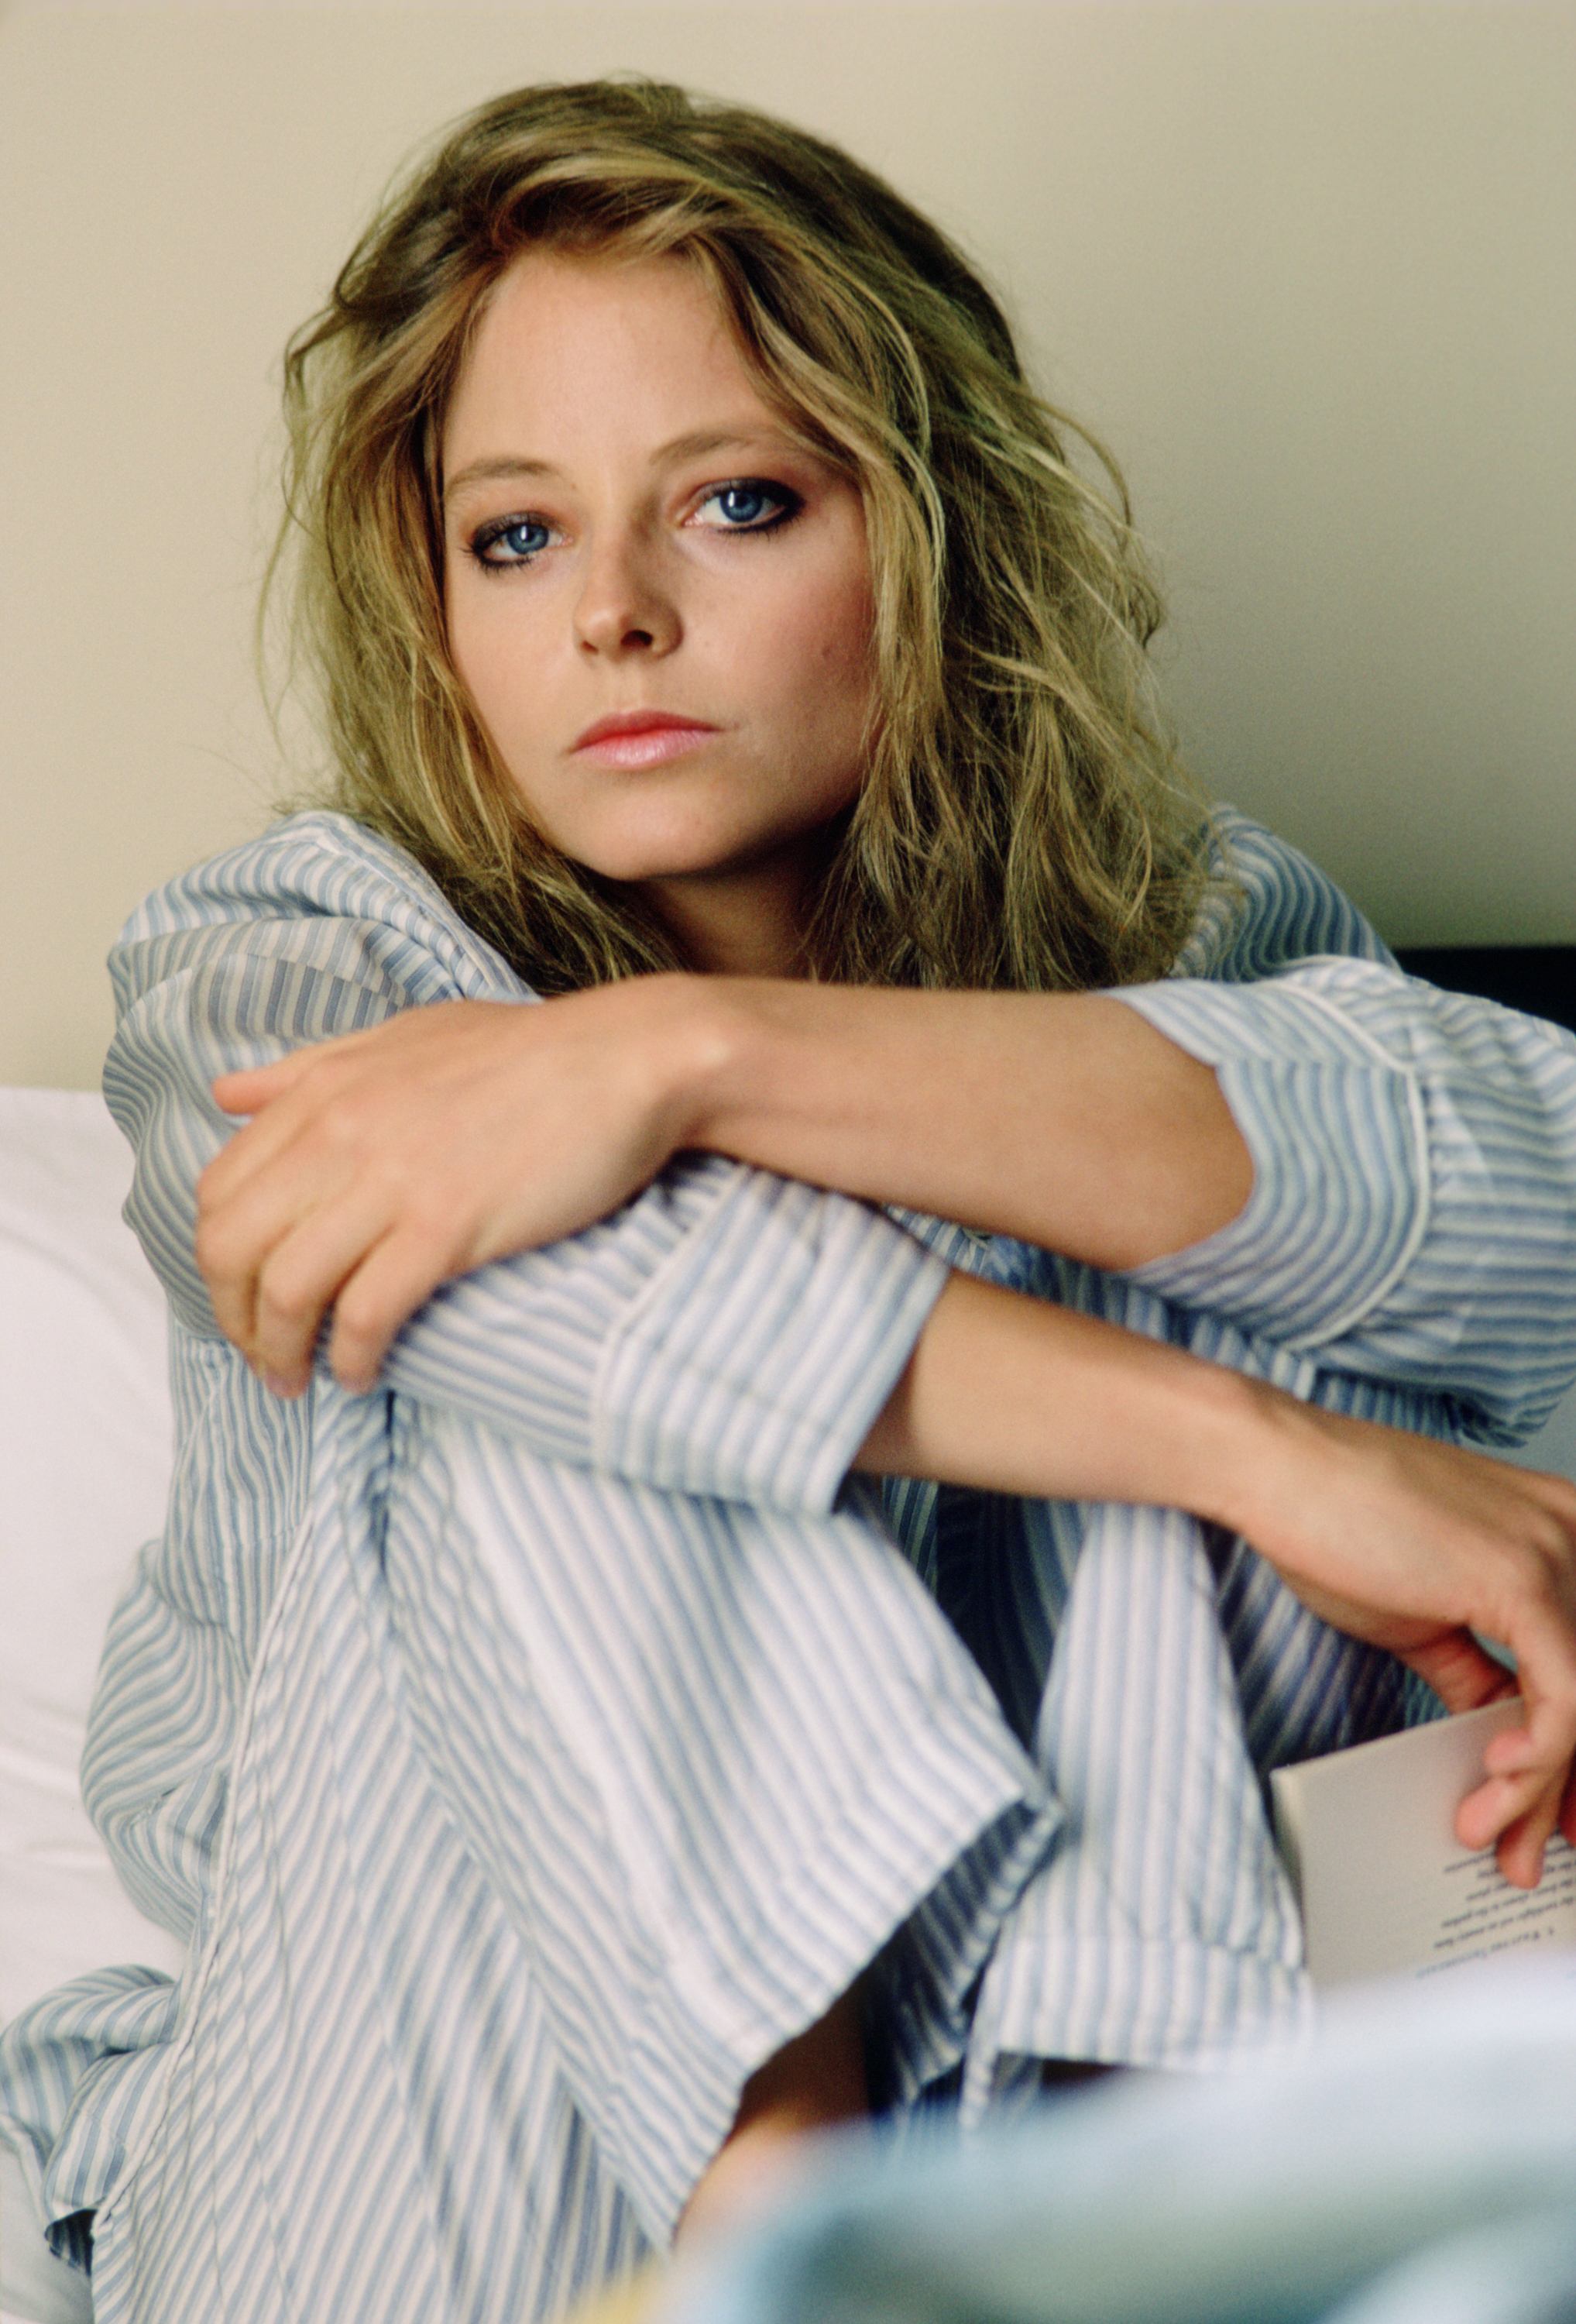 Jodie Foster in June 1987 in Vancouver, Canada | Source: Getty Images